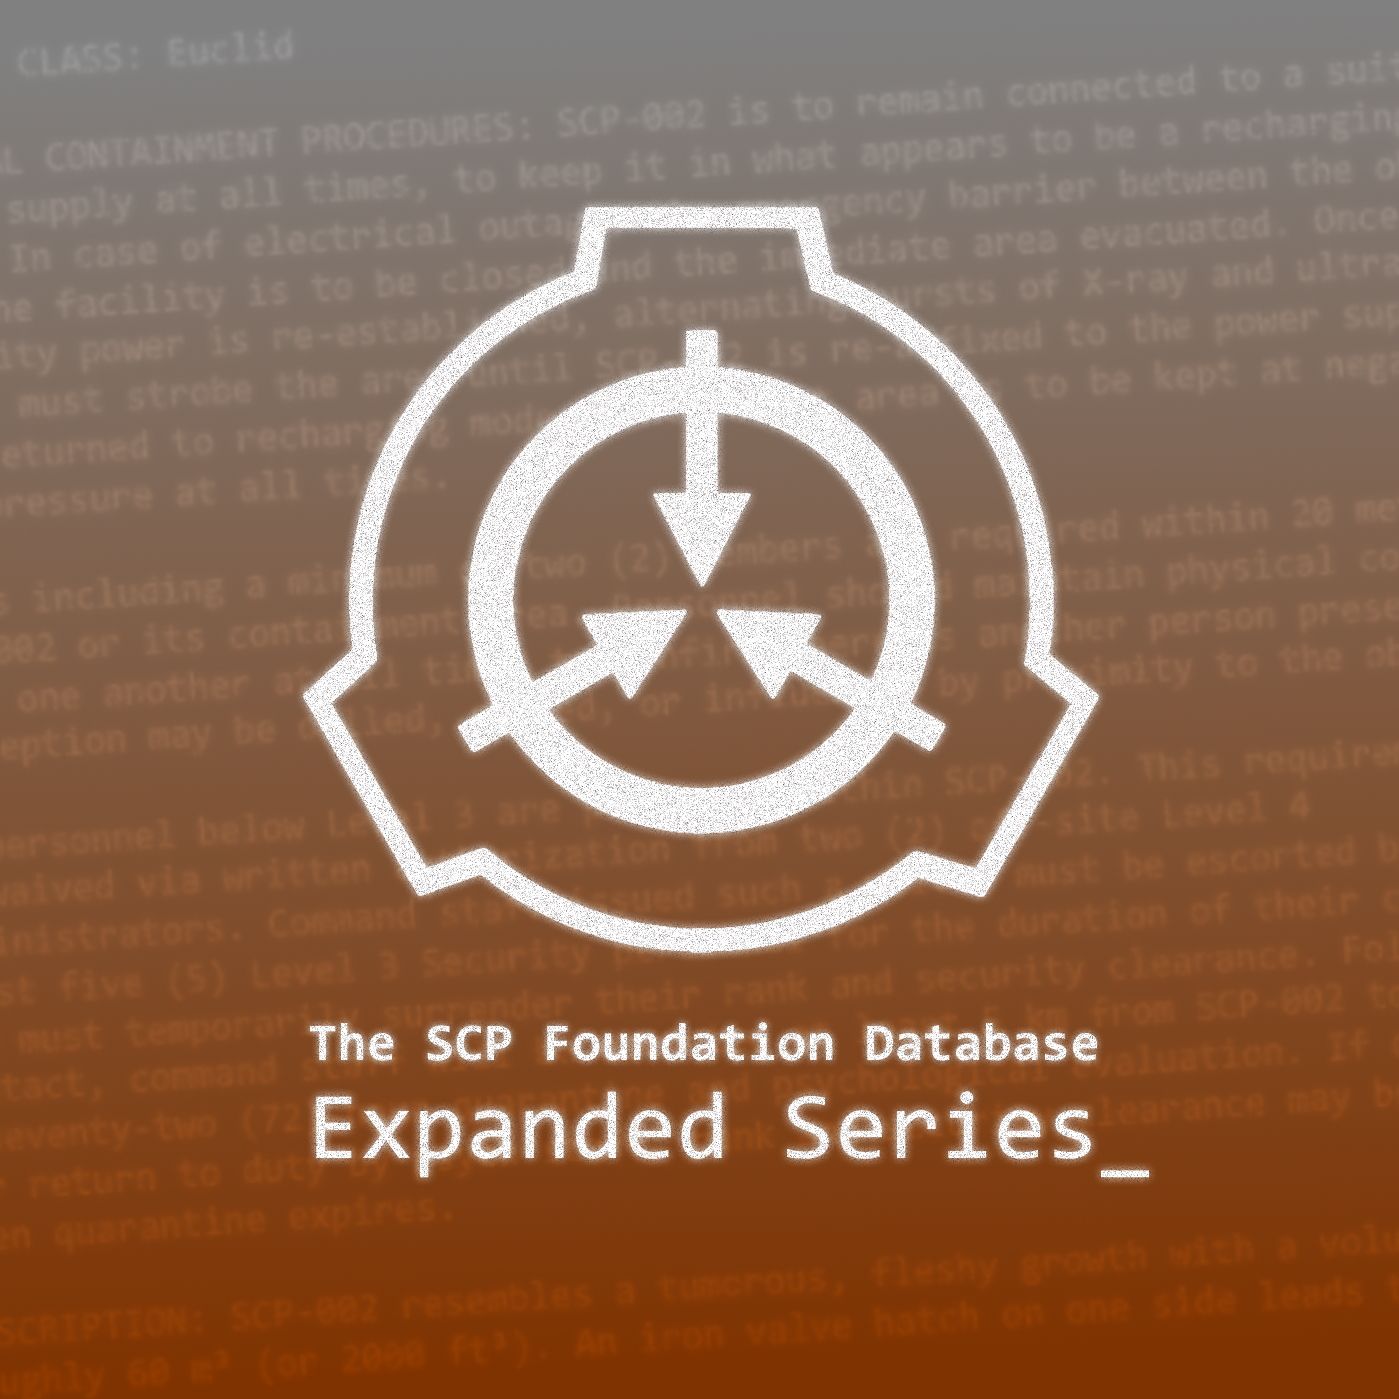 I kinda was bored at the end, but this is my attempt for scp class logo  designs, Hope i did well. Please no harsh comments, maybe some critiques!  Thanks : r/SCP